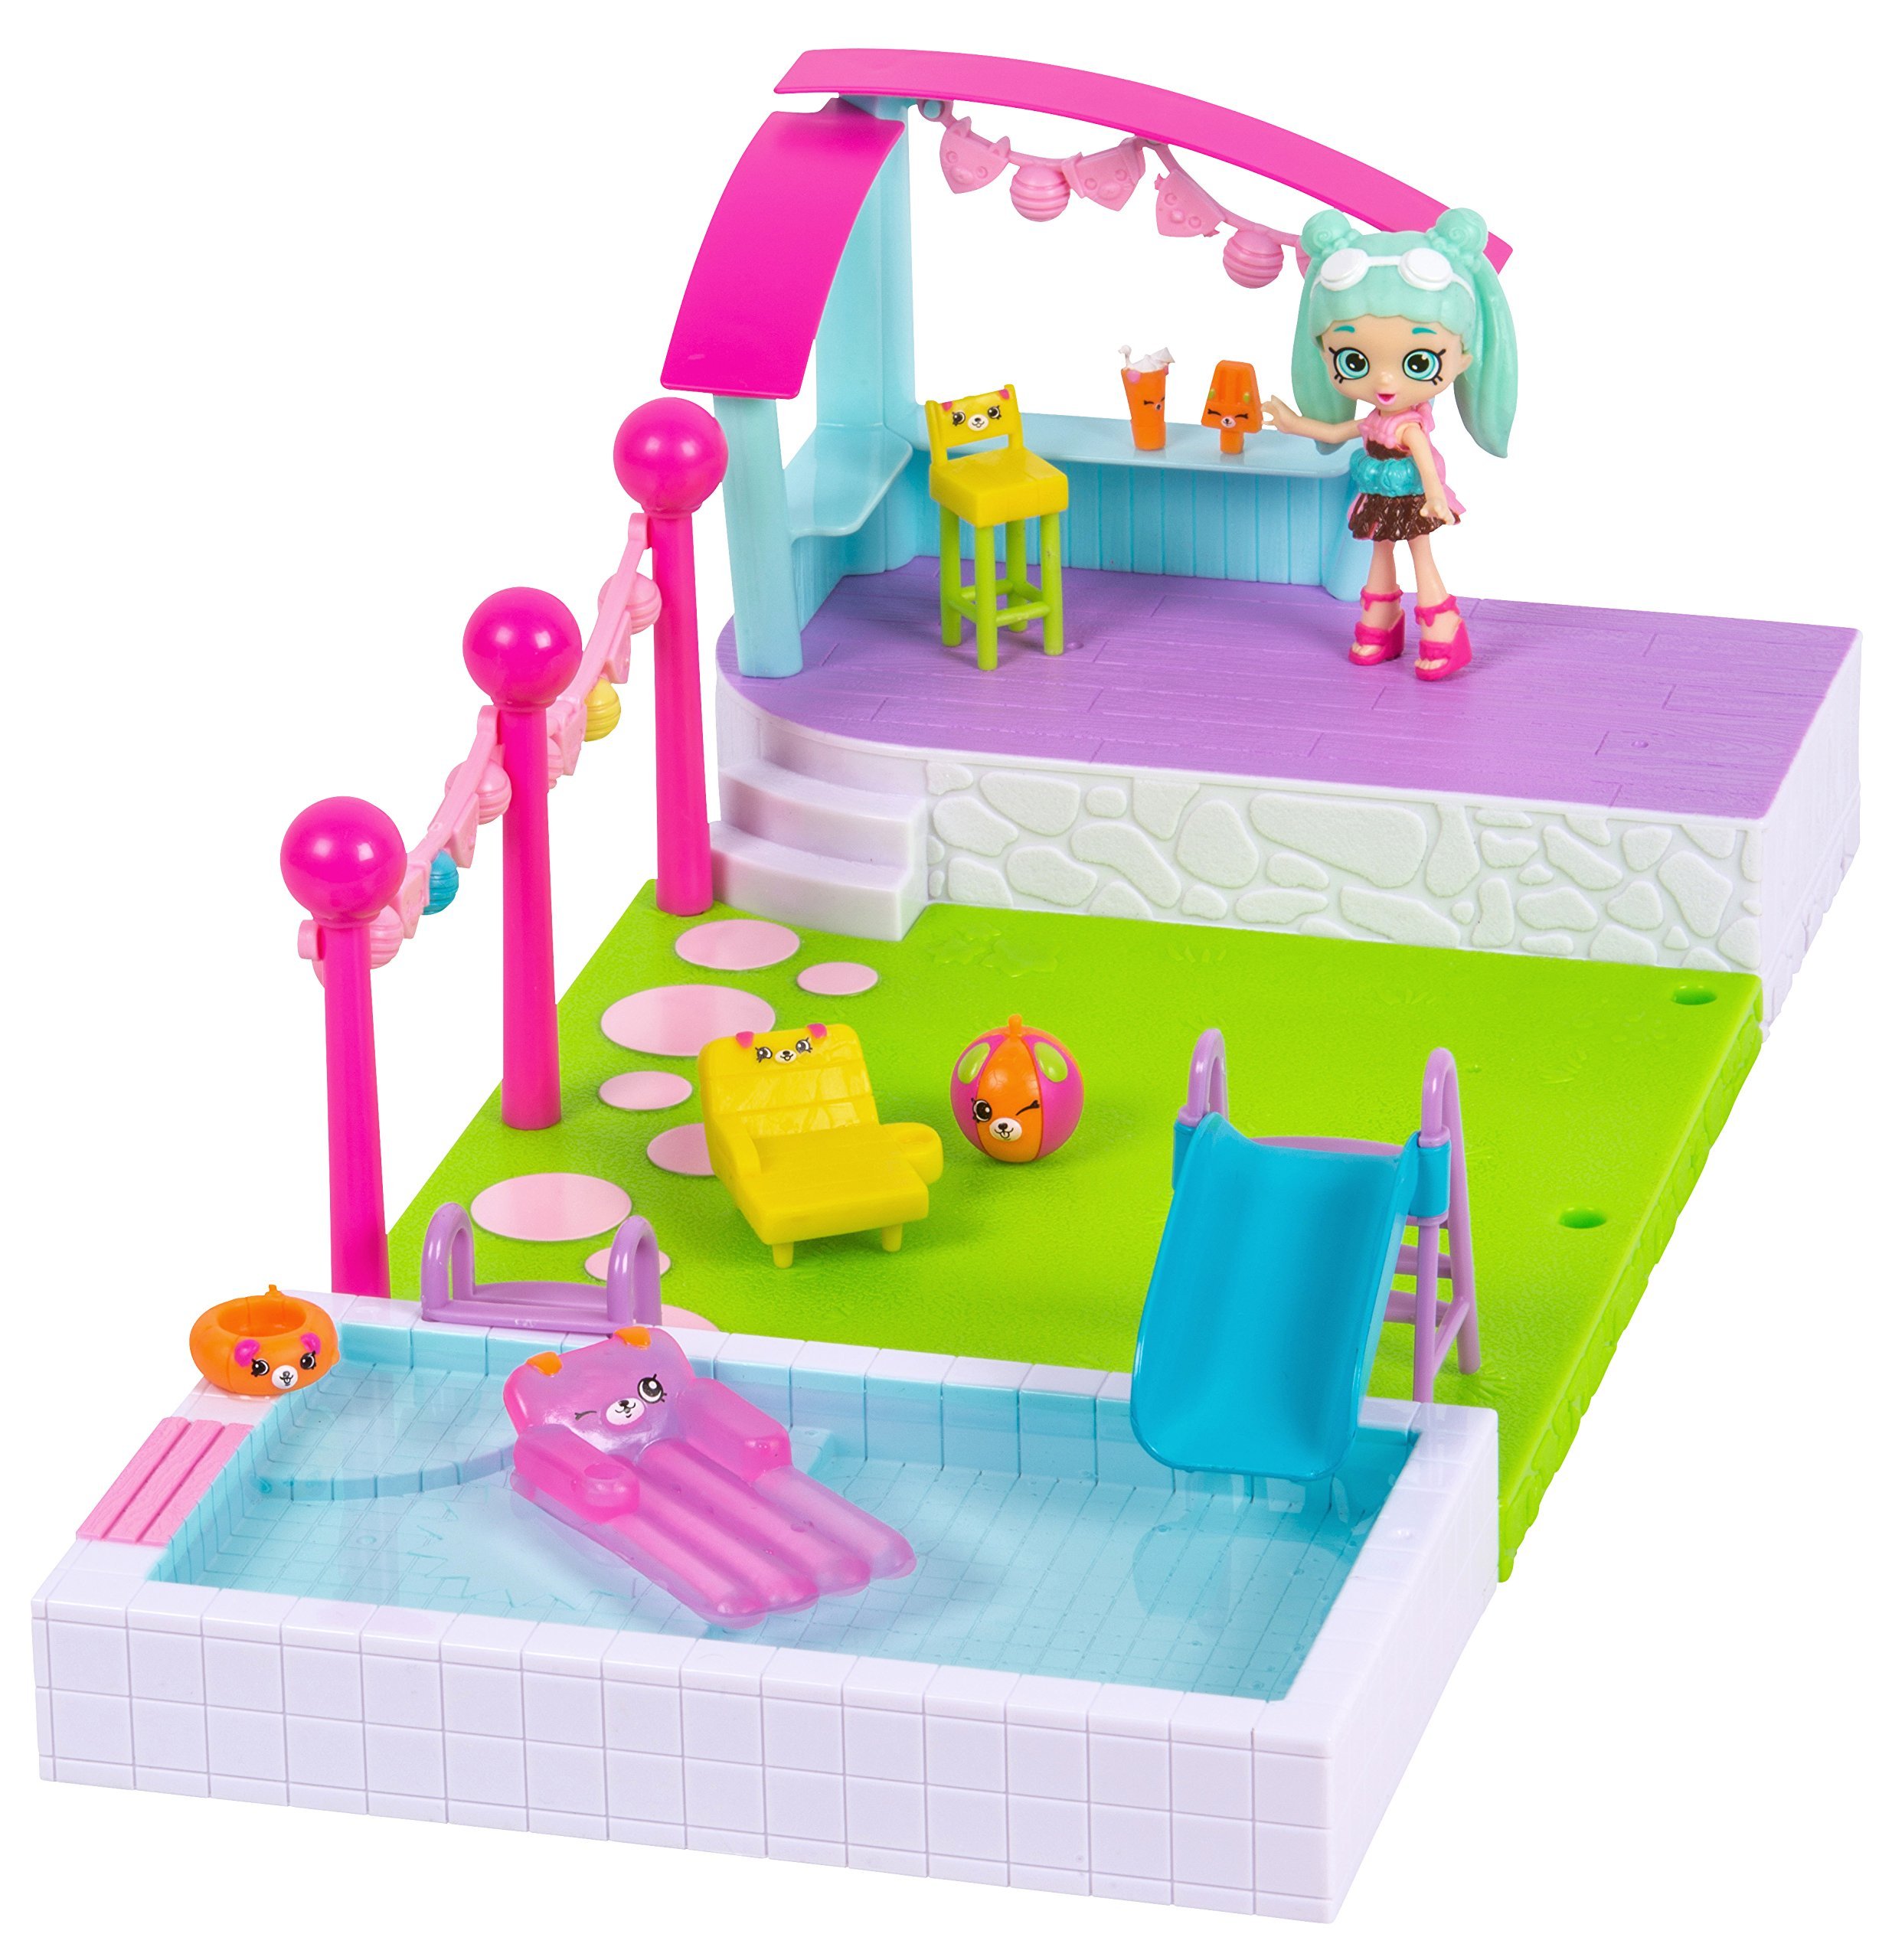 tabe Luscious omhyggeligt Køb Shopkins - Happy Places Pool Sæt